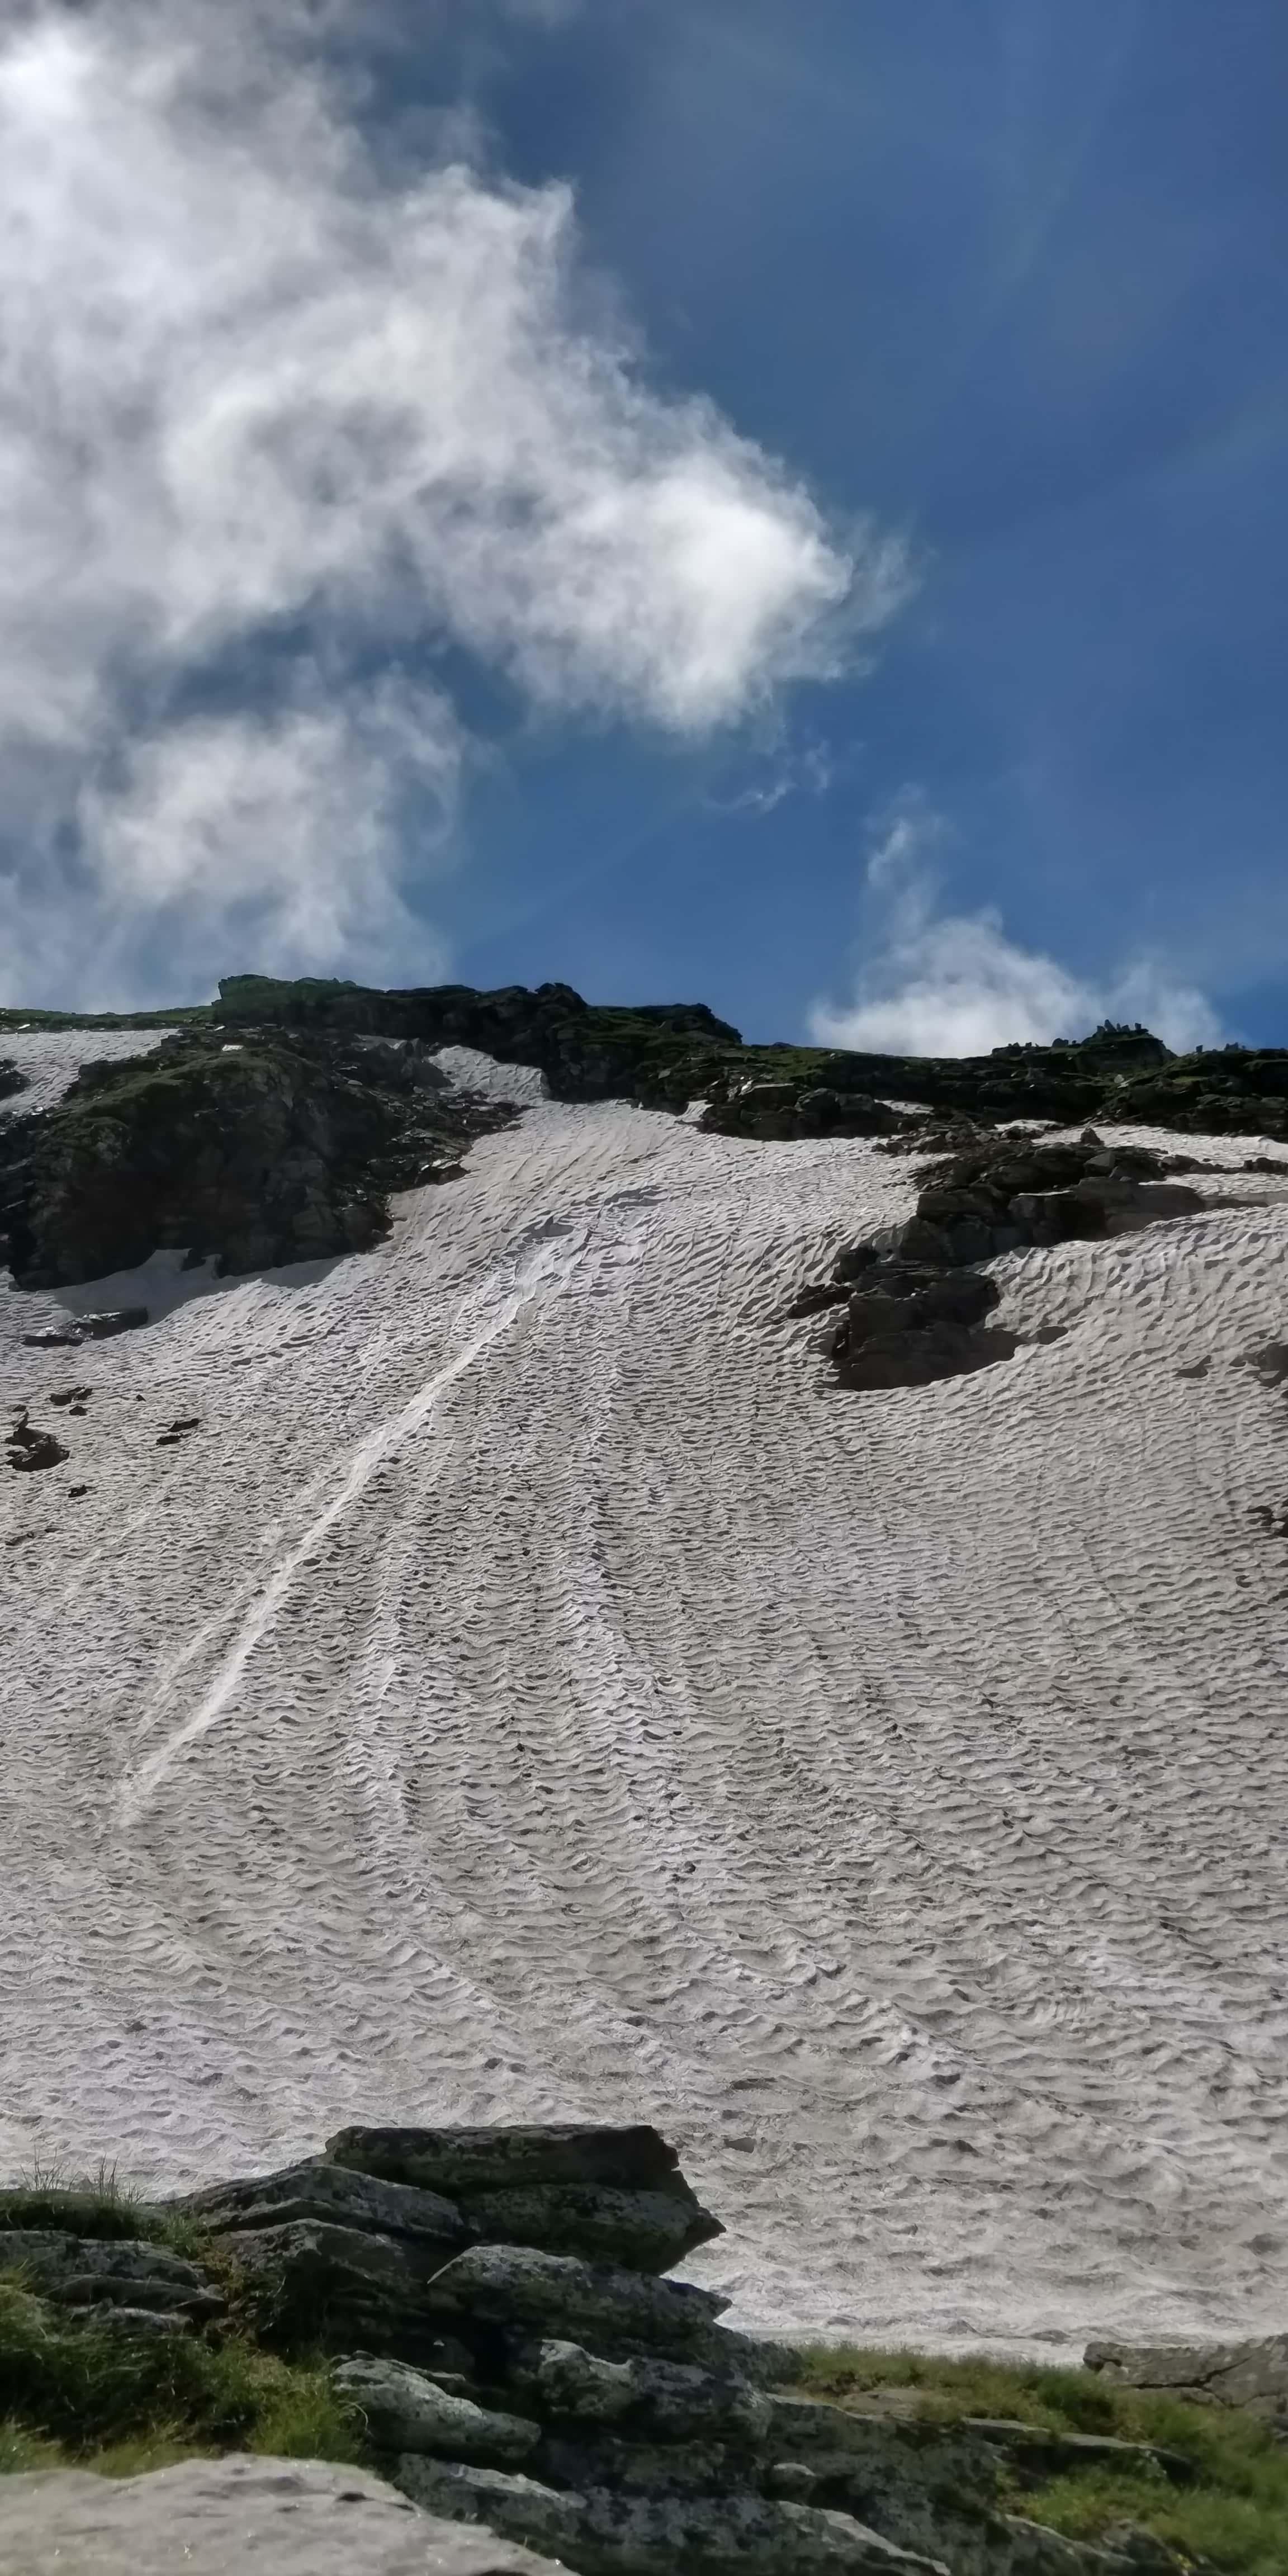 Final snow ascent on summit day